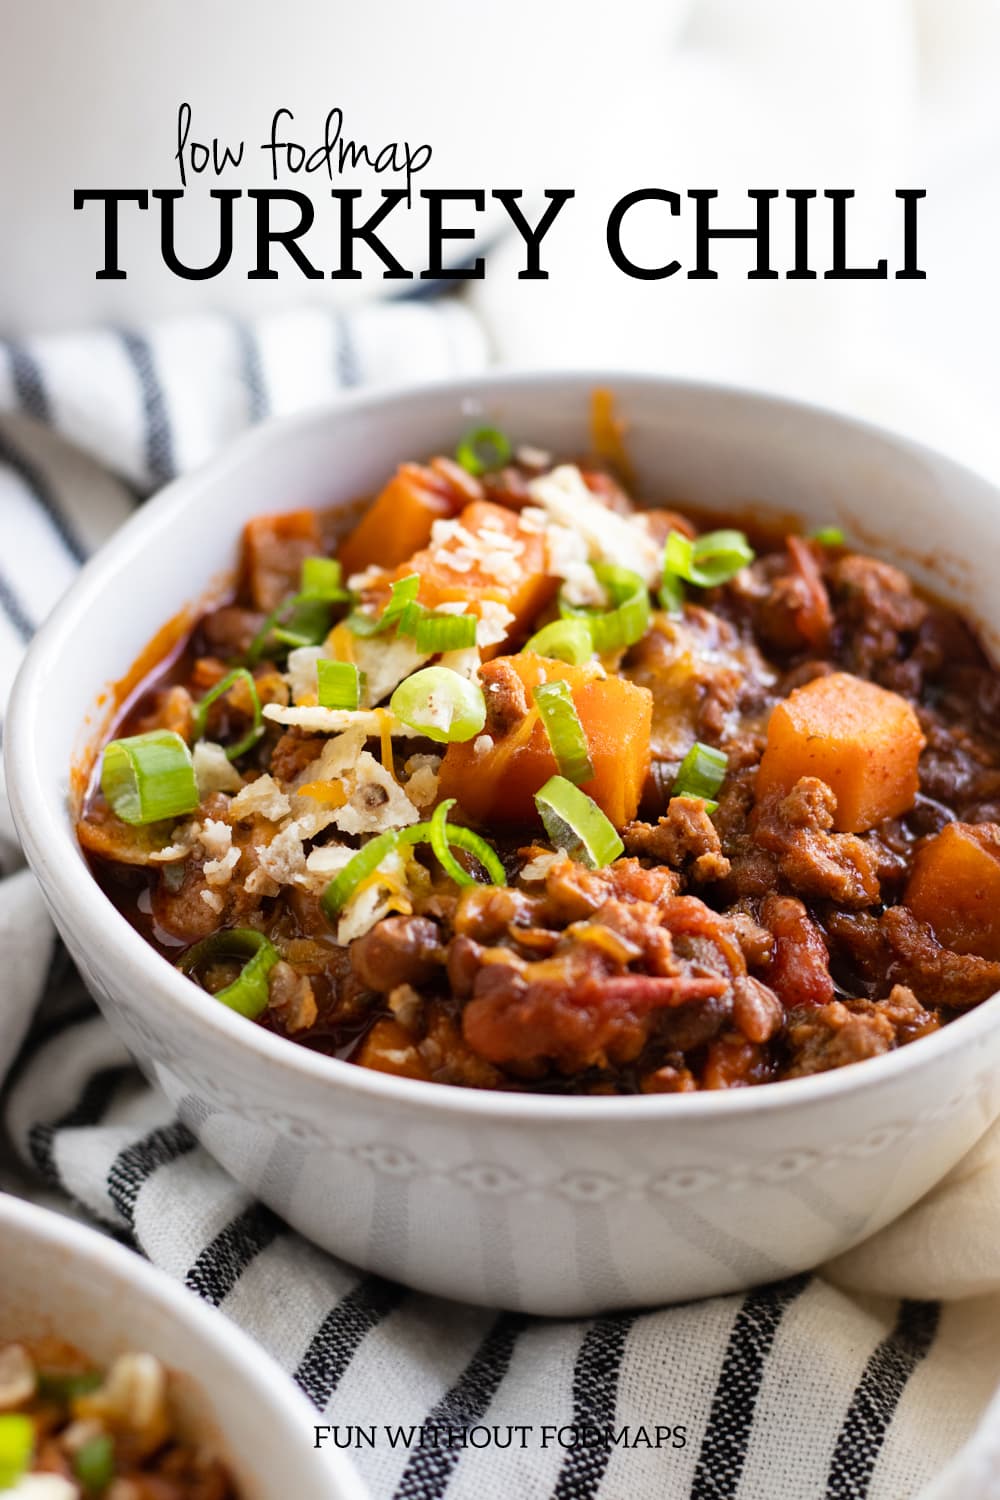 A close up of a bowl of turkey chili made with sweet potatoes and canned lentils. Above the bowl, a black text overlay reads "Low FODMAP Turkey Chili."